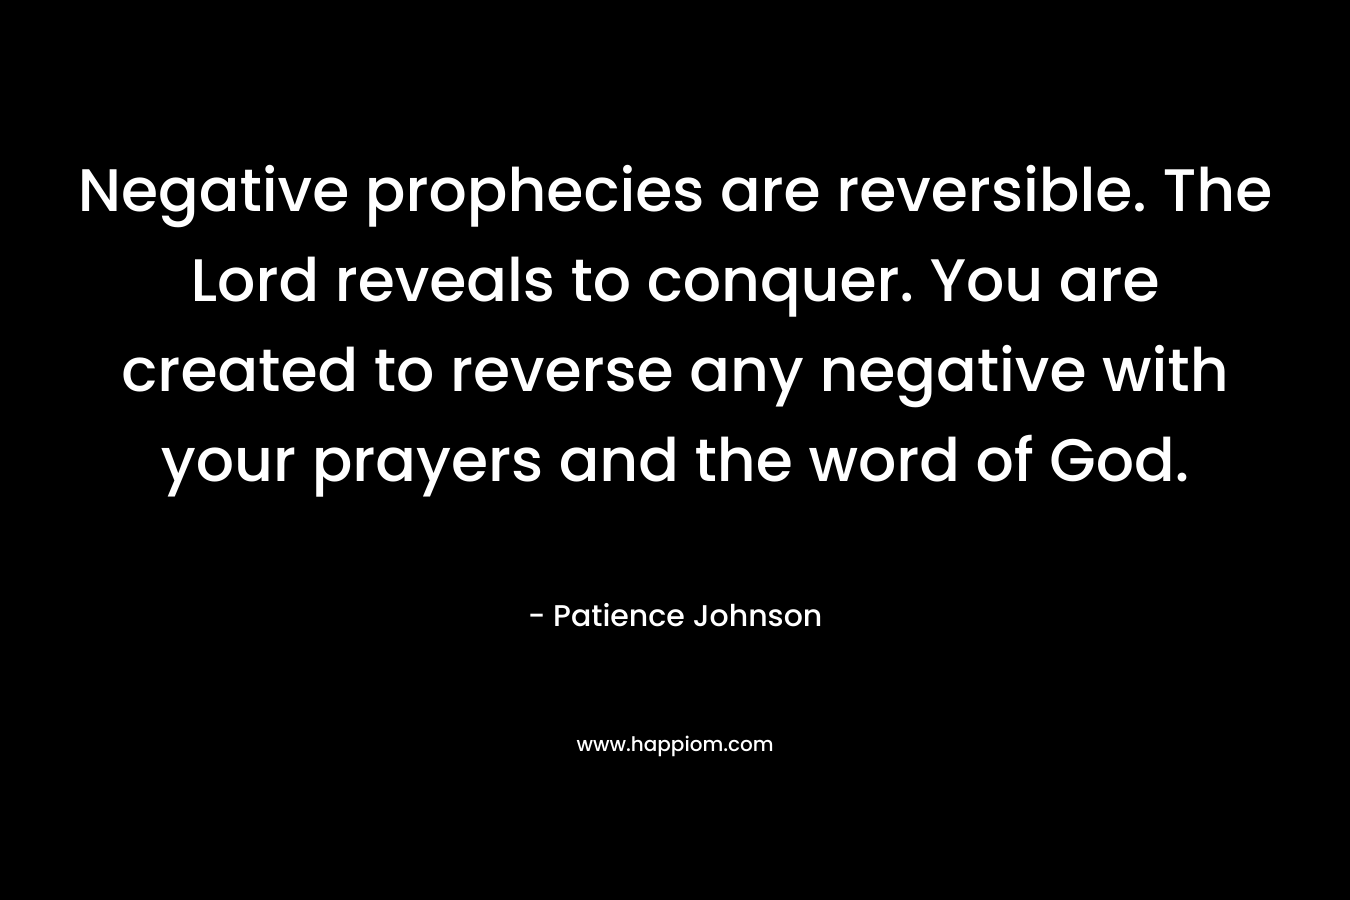 Negative prophecies are reversible. The Lord reveals to conquer. You are created to reverse any negative with your prayers and the word of God.